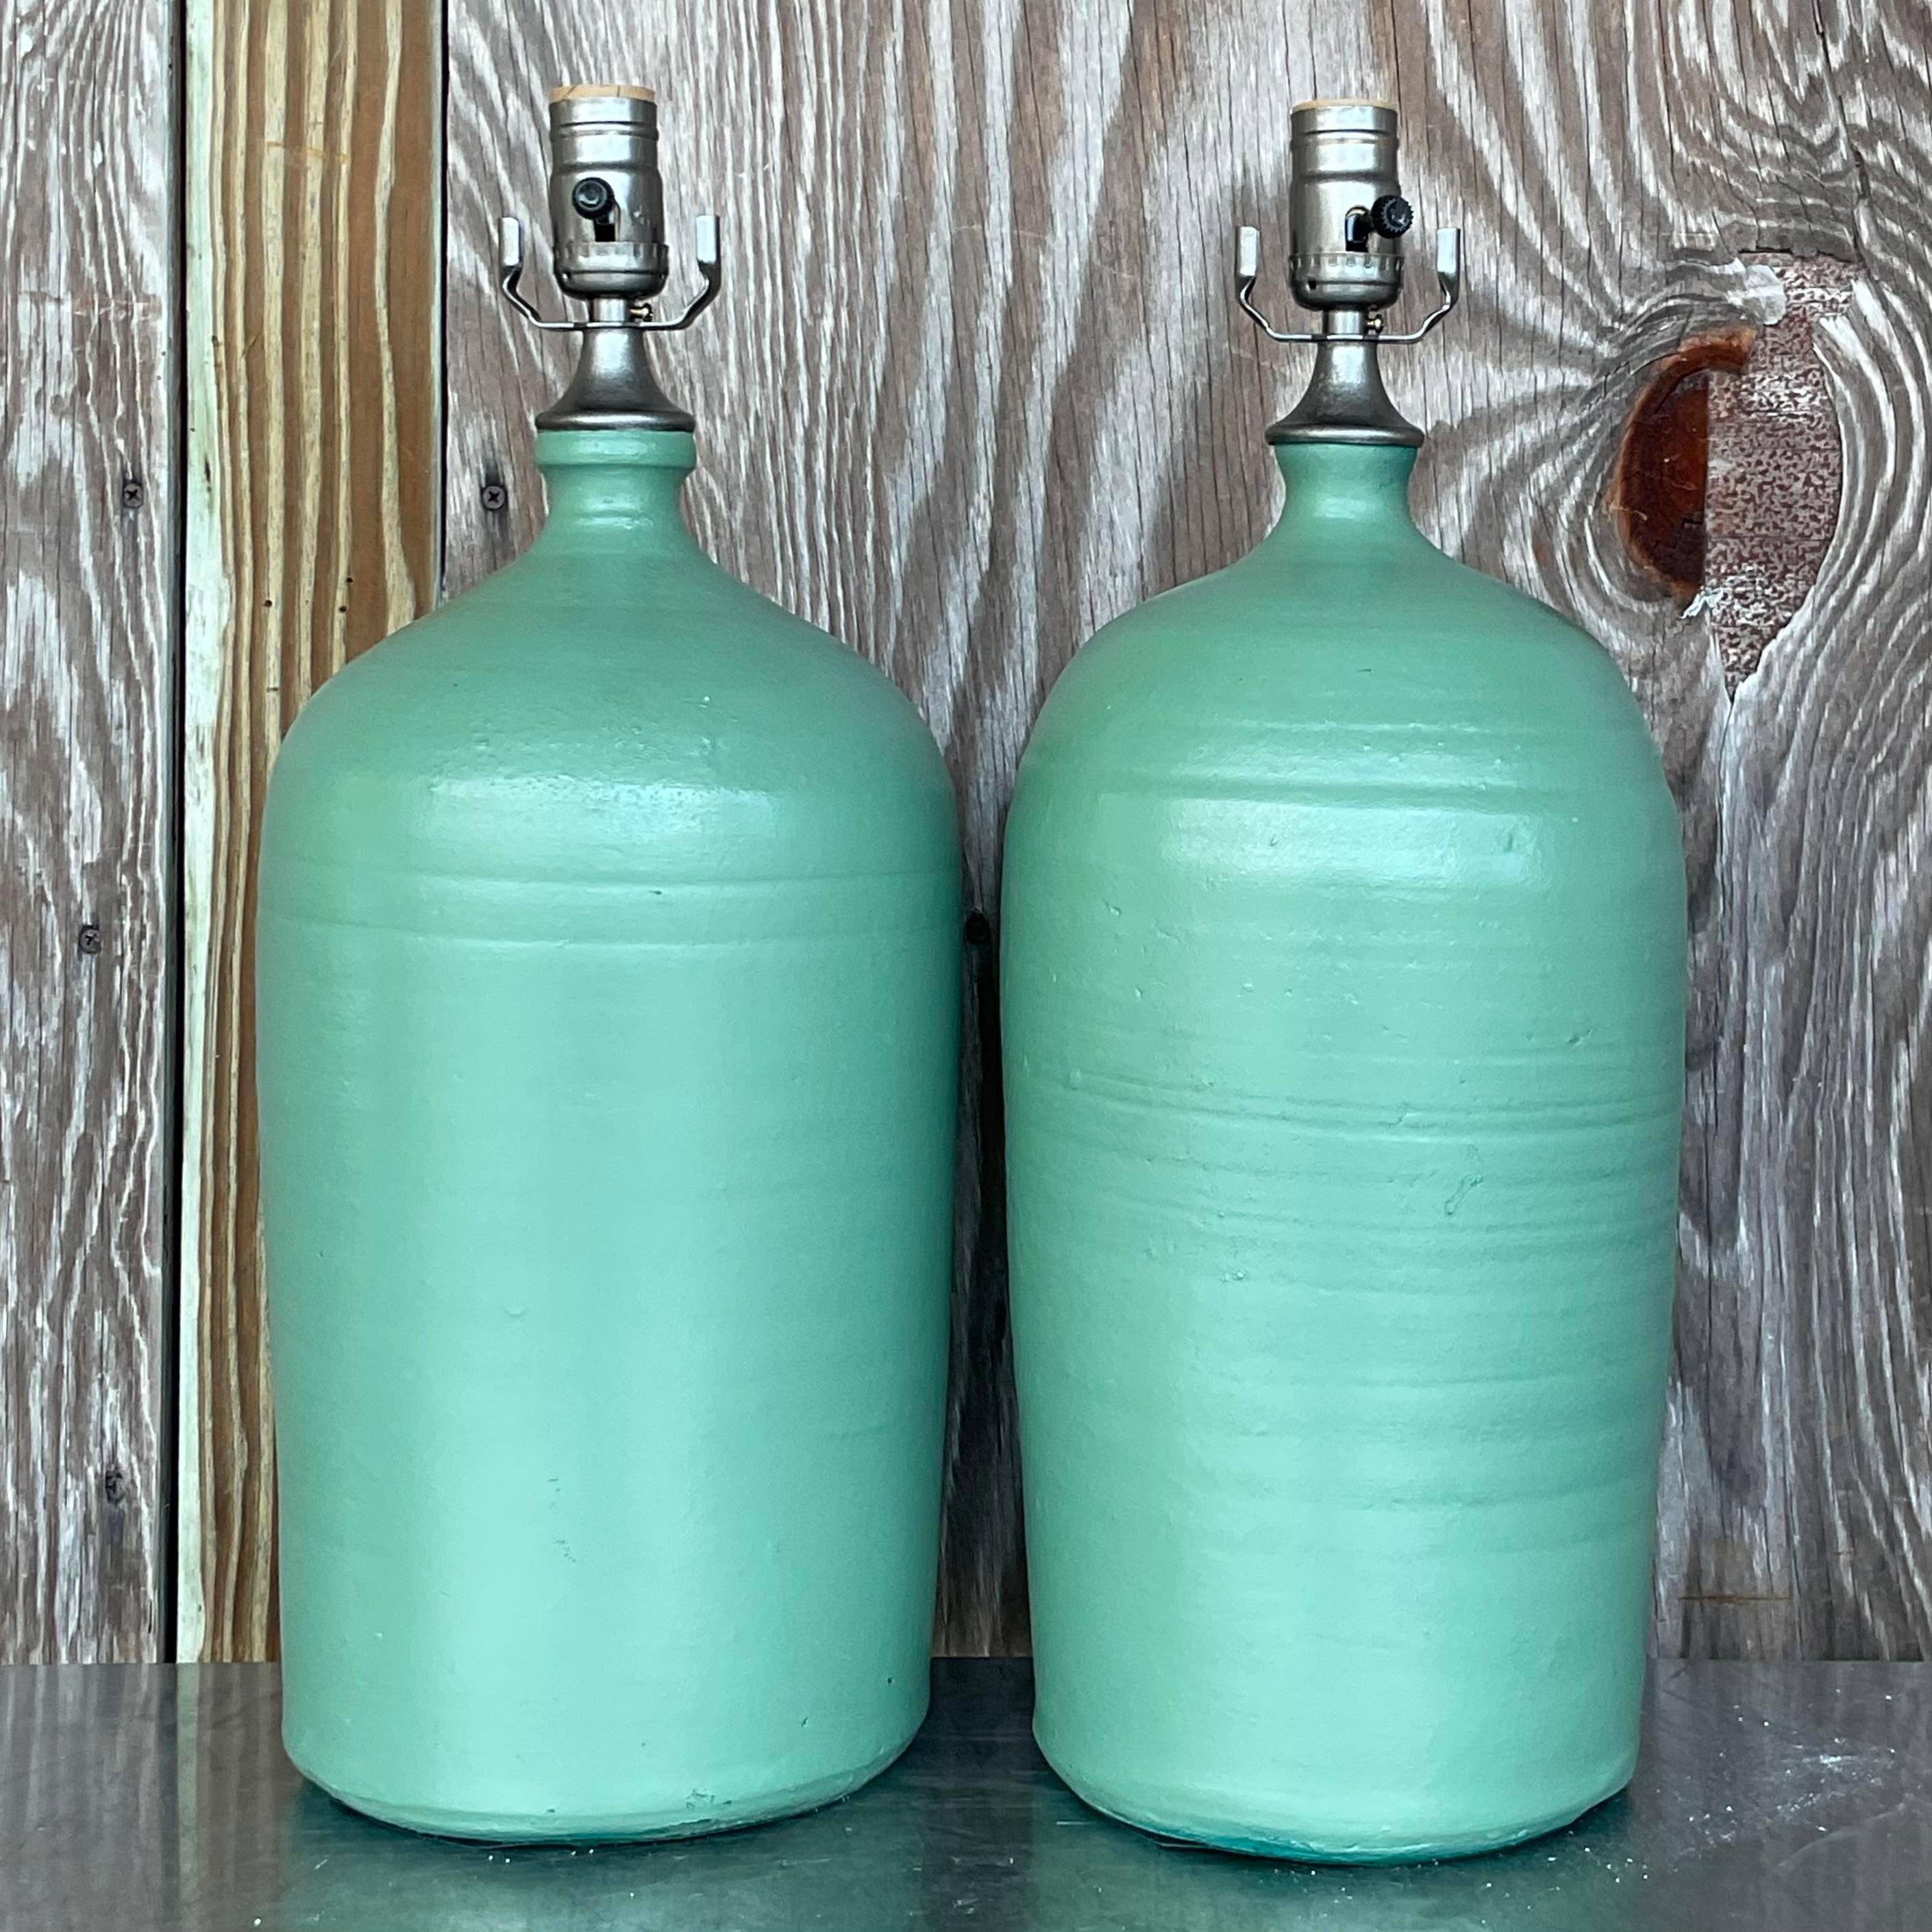 Vintage Boho Matte Glazed Ceramic Lamps - a Pair In Good Condition For Sale In west palm beach, FL